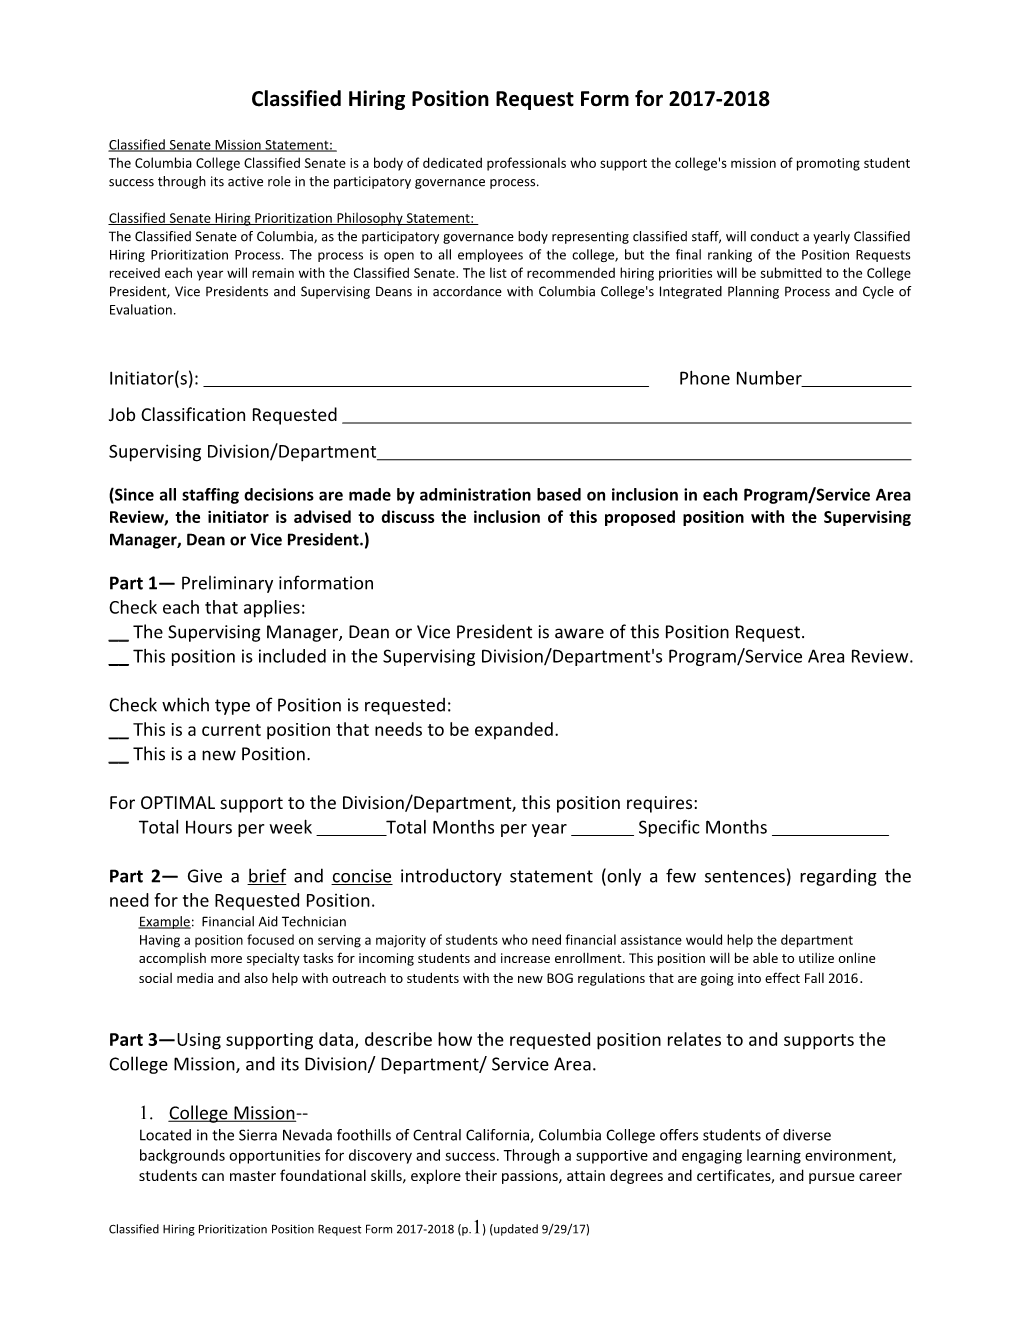 Classified Hiring Position Request Form for 2017-2018